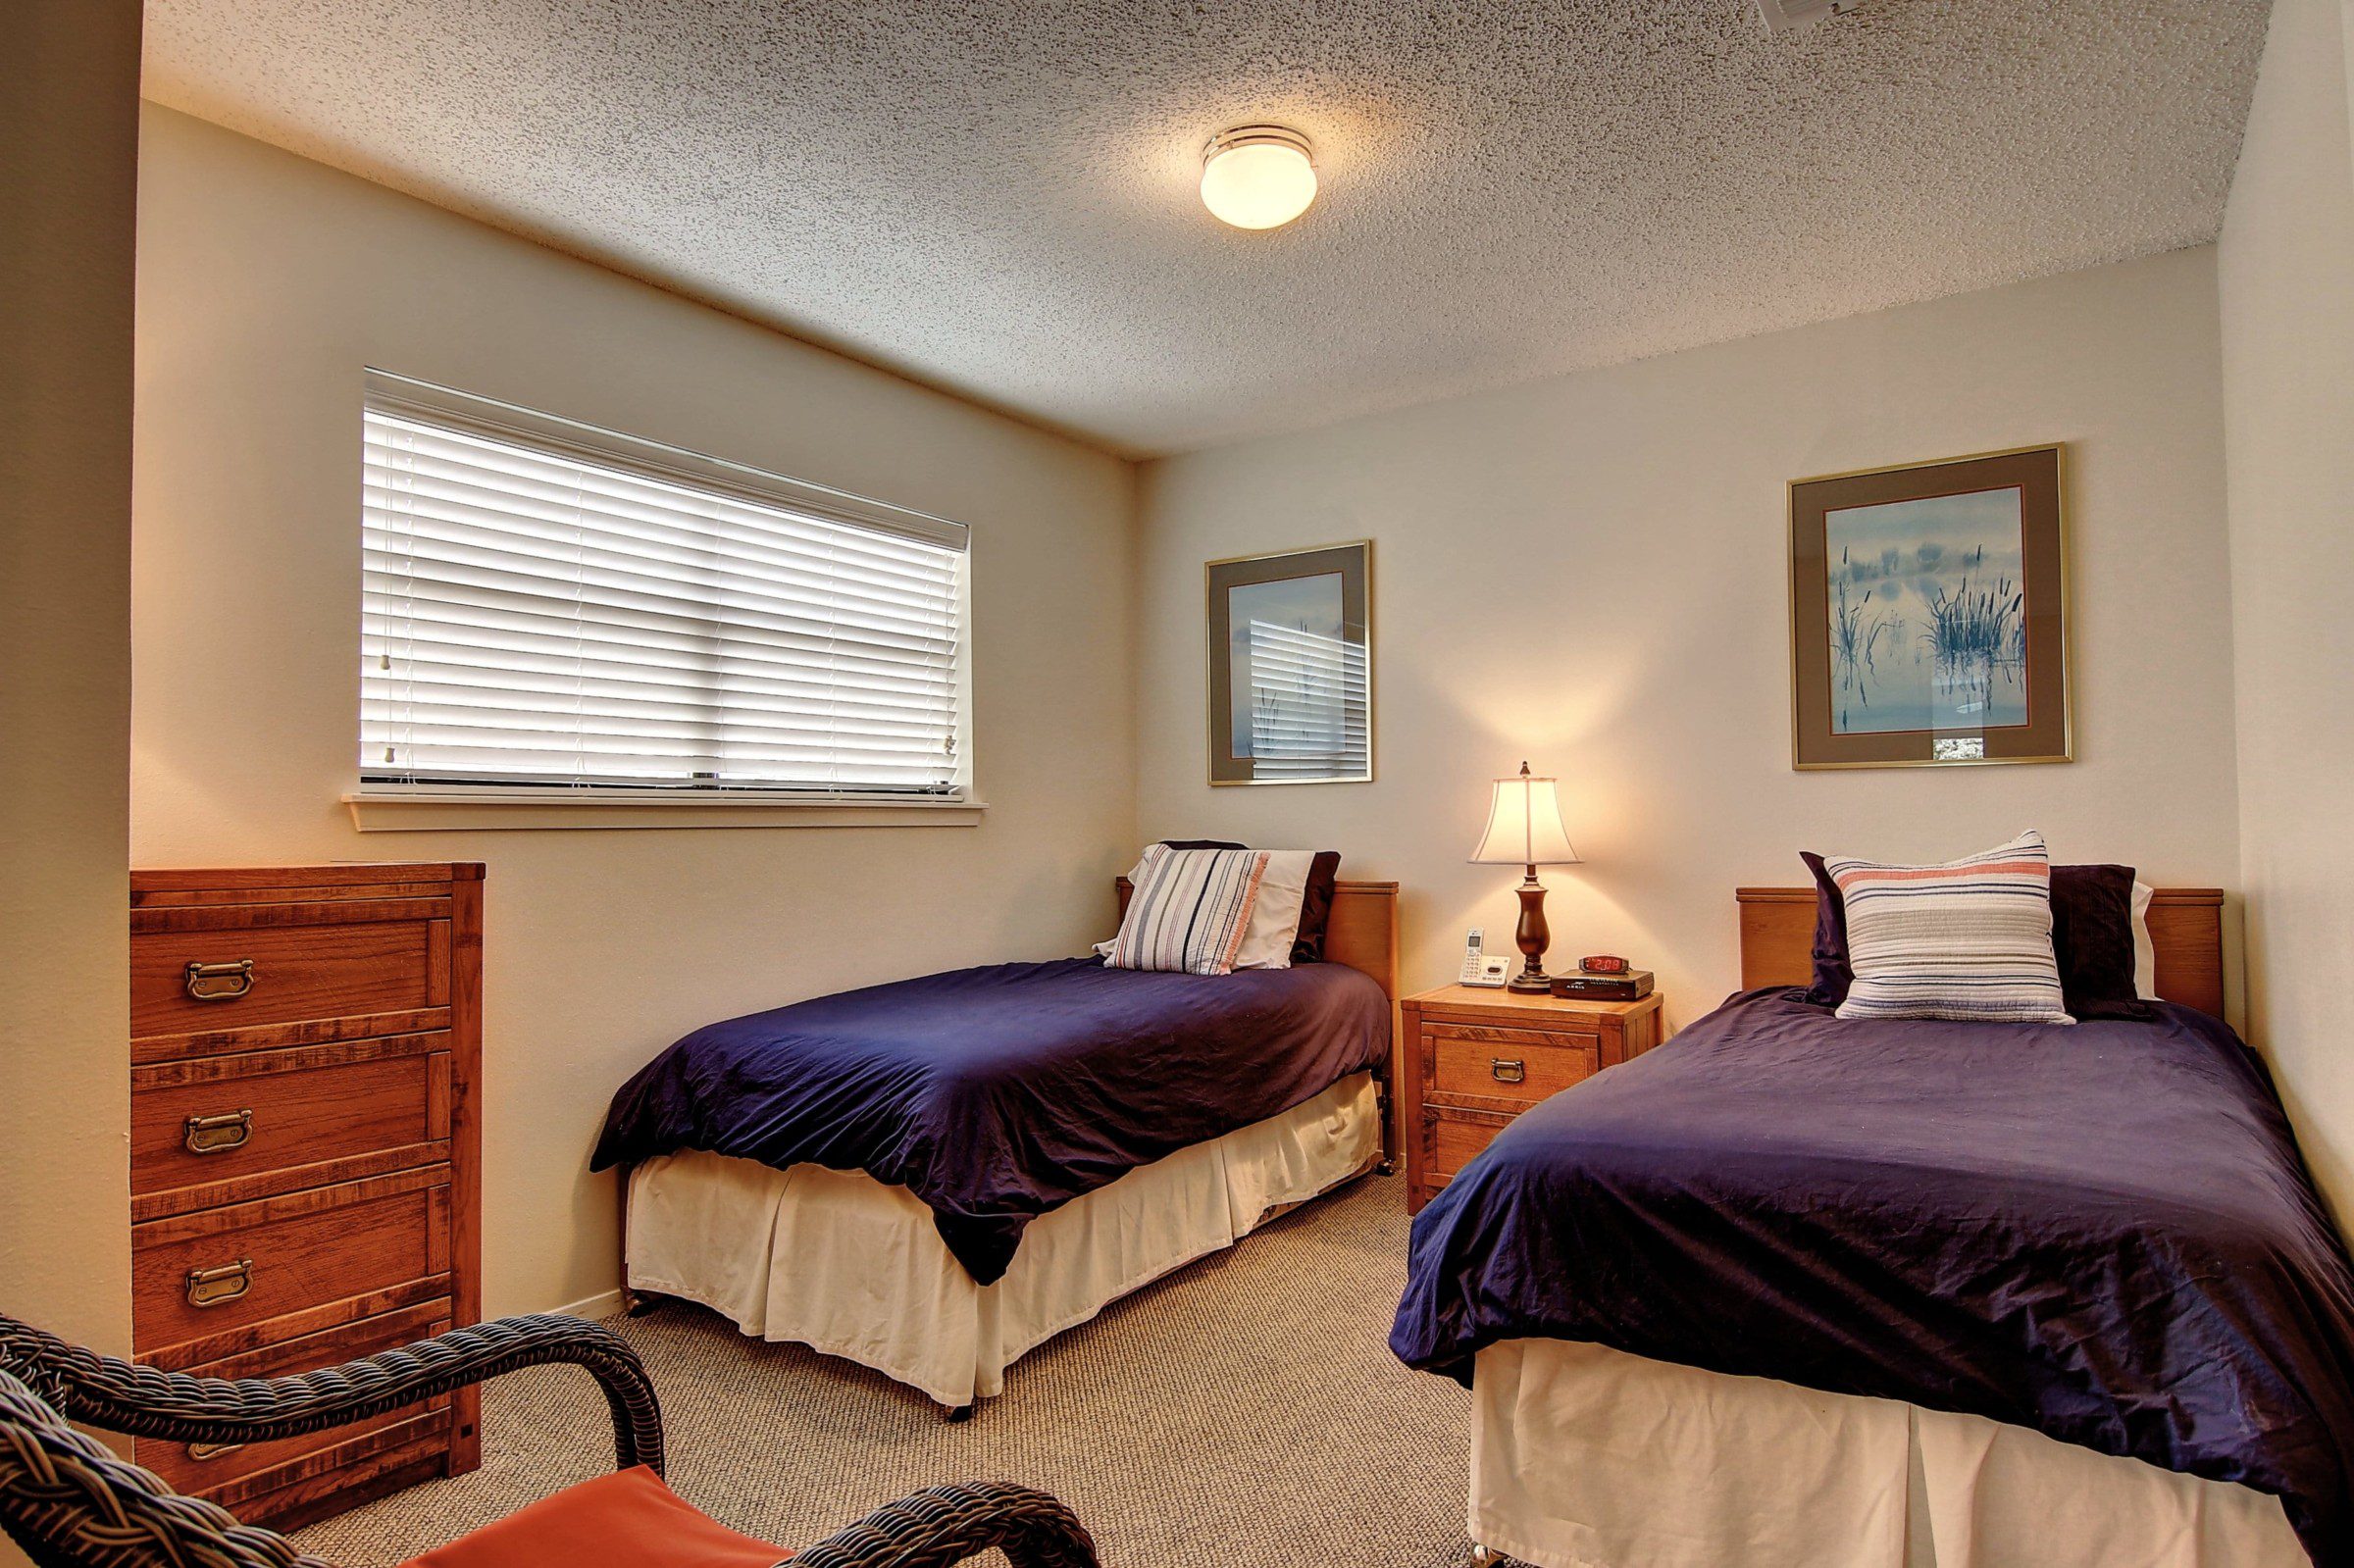 Comal River vacation home bedroom with twin beds.